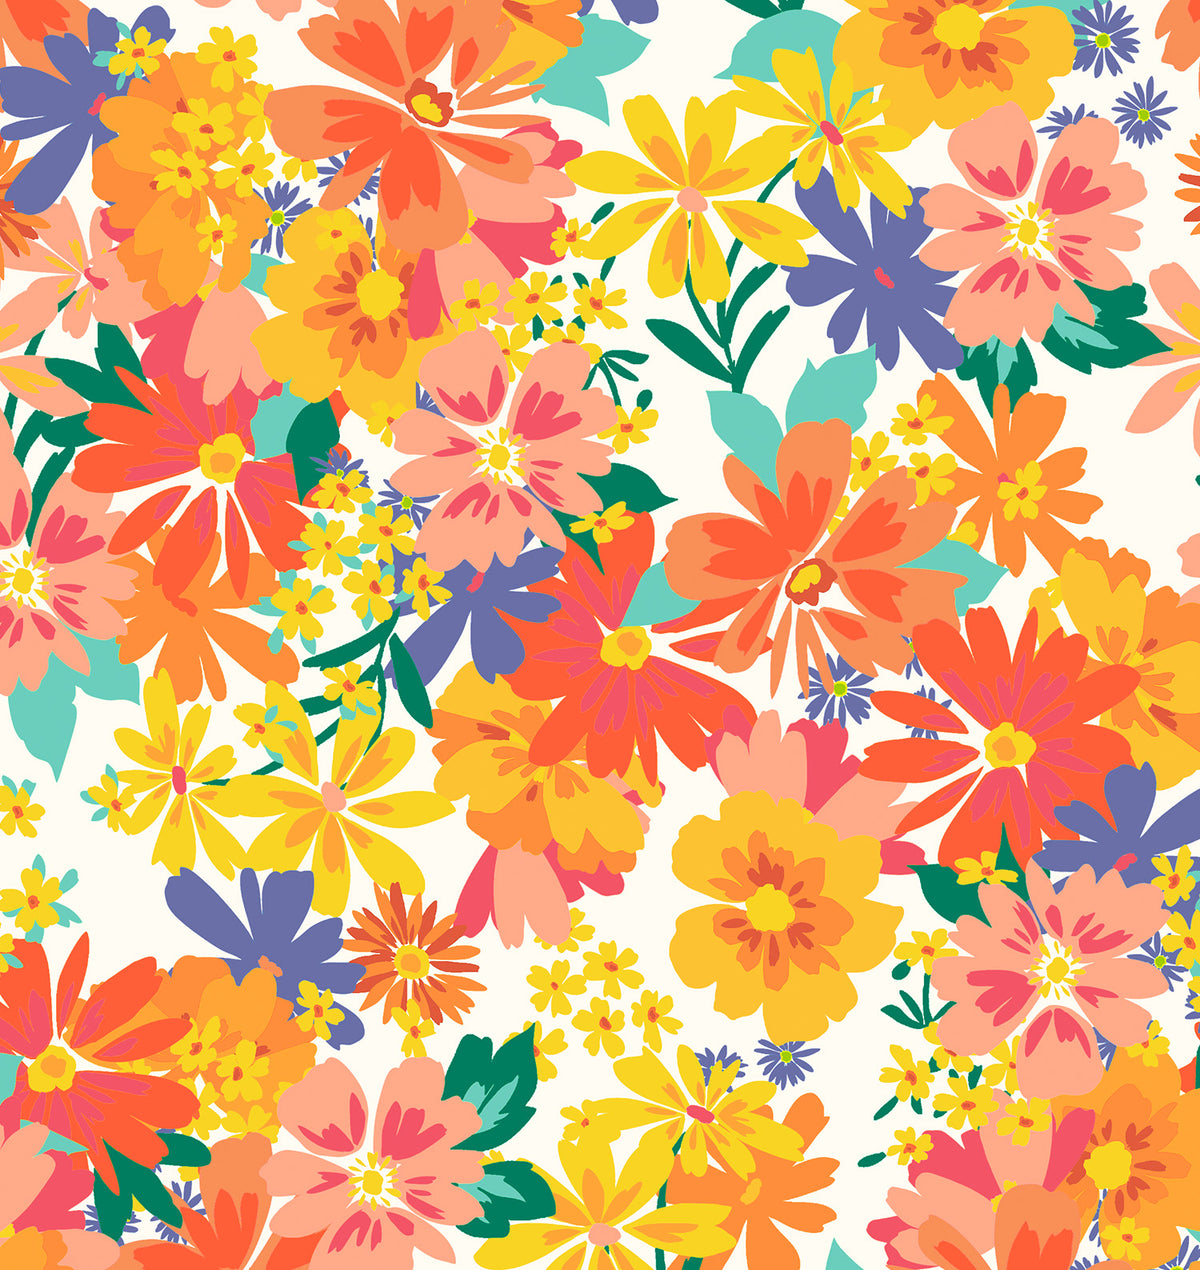 Swim Systems Beach Blooms 60s-inspired floral print with vibrant vintage wildflowers on a white background, made from recycled fabric